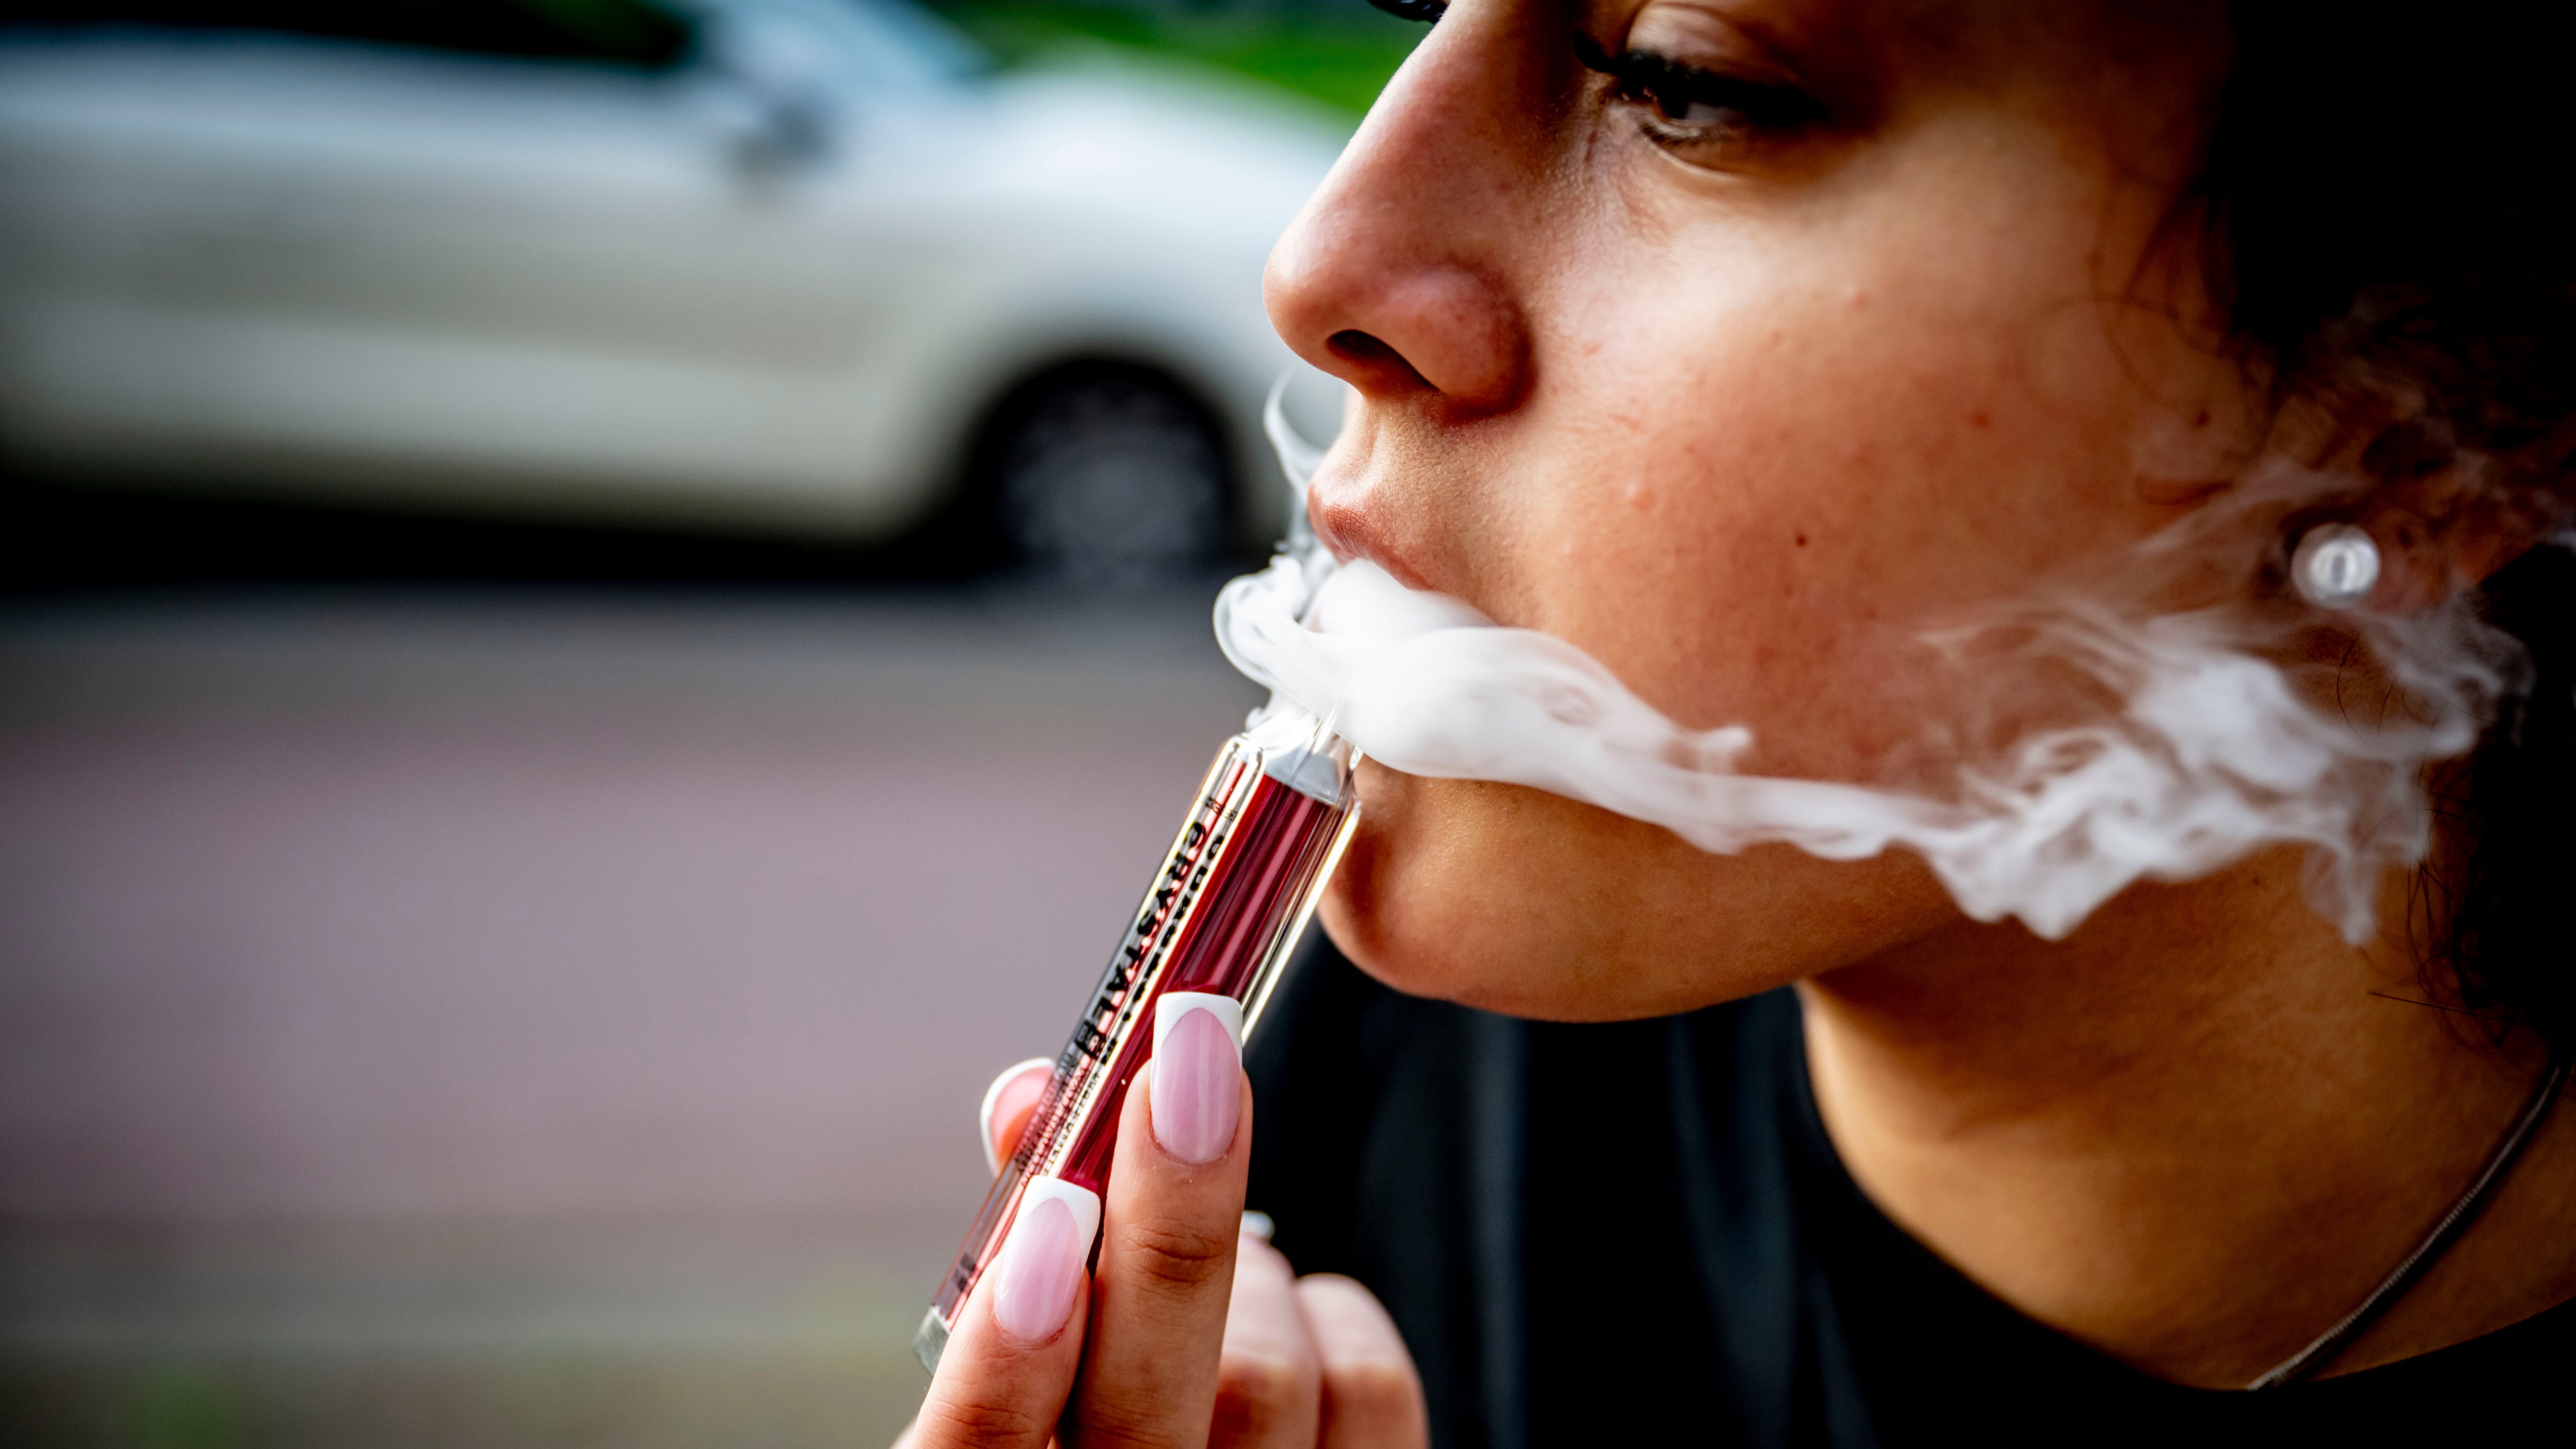 Although Ireland thought it had beaten smoking, it is now facing a vaping epidemic